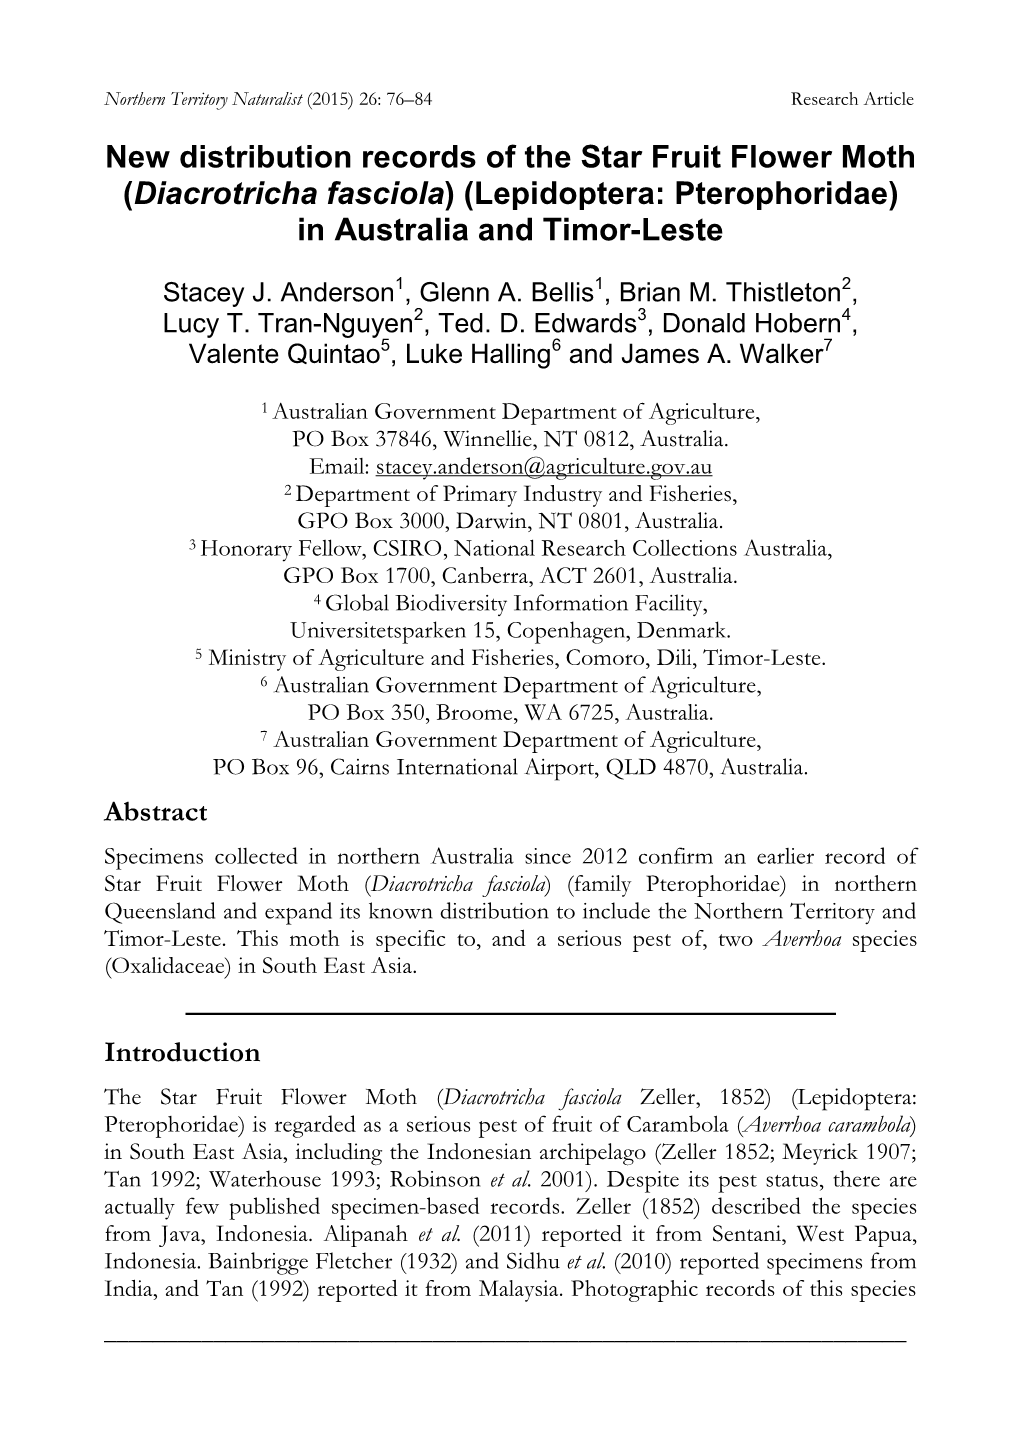 New Distribution Records of the Star Fruit Flower Moth (Diacrotricha Fasciola) (Lepidoptera: Pterophoridae) in Australia and Timor-Leste